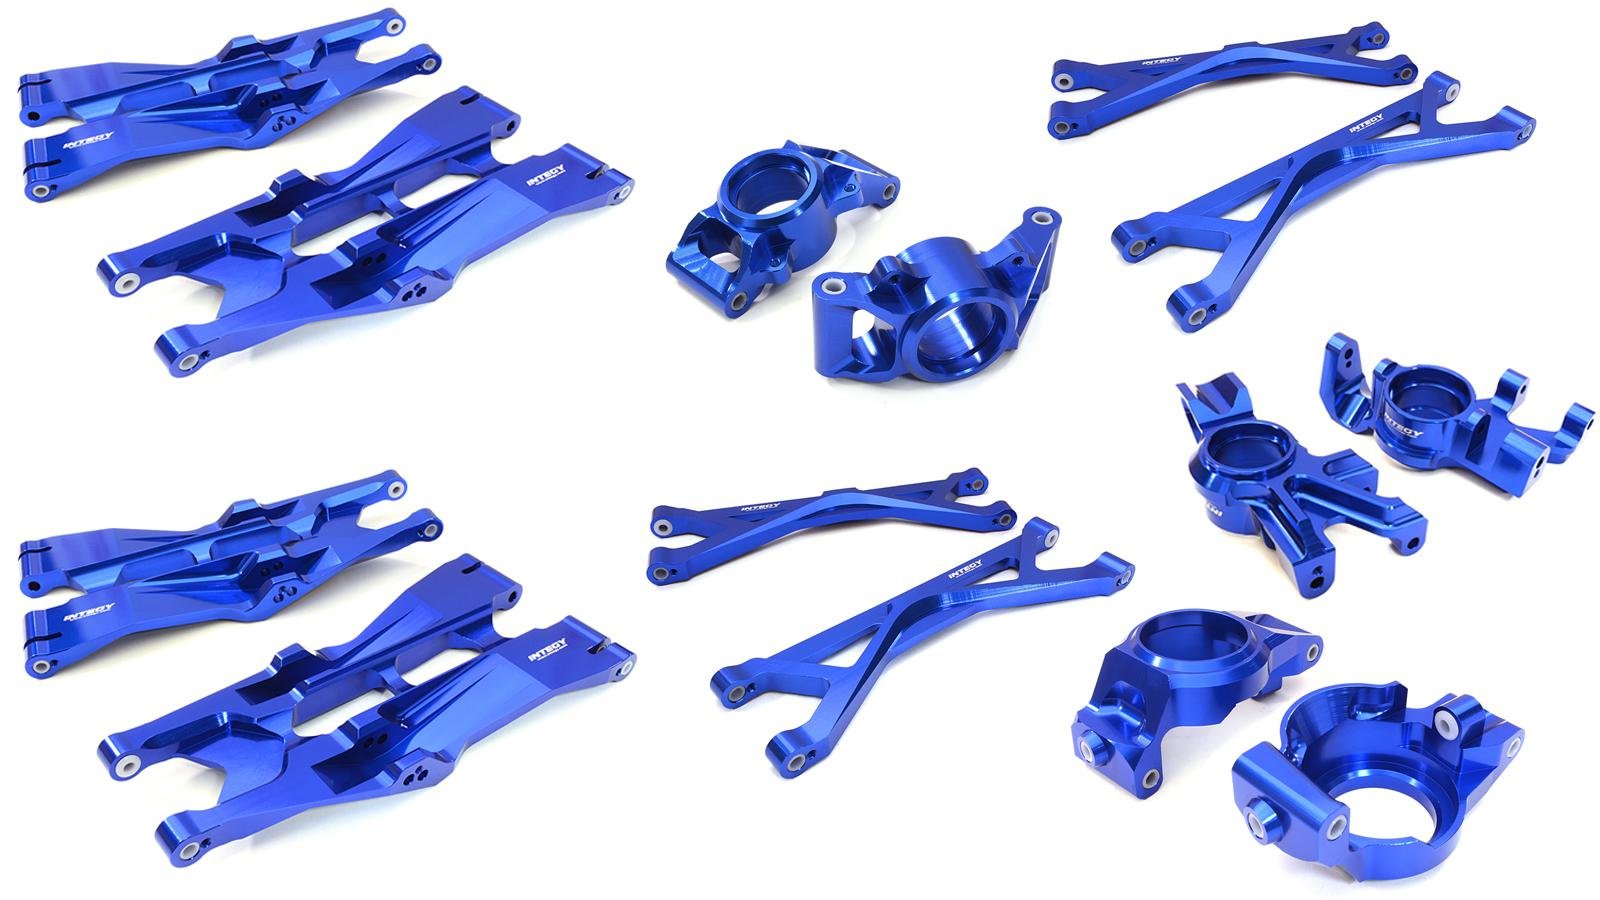 Details about   Aluminum Suspension Arms #7730 #7731 For RC 1/5 Traxxas X-Maxx 77076-4 77086-4 